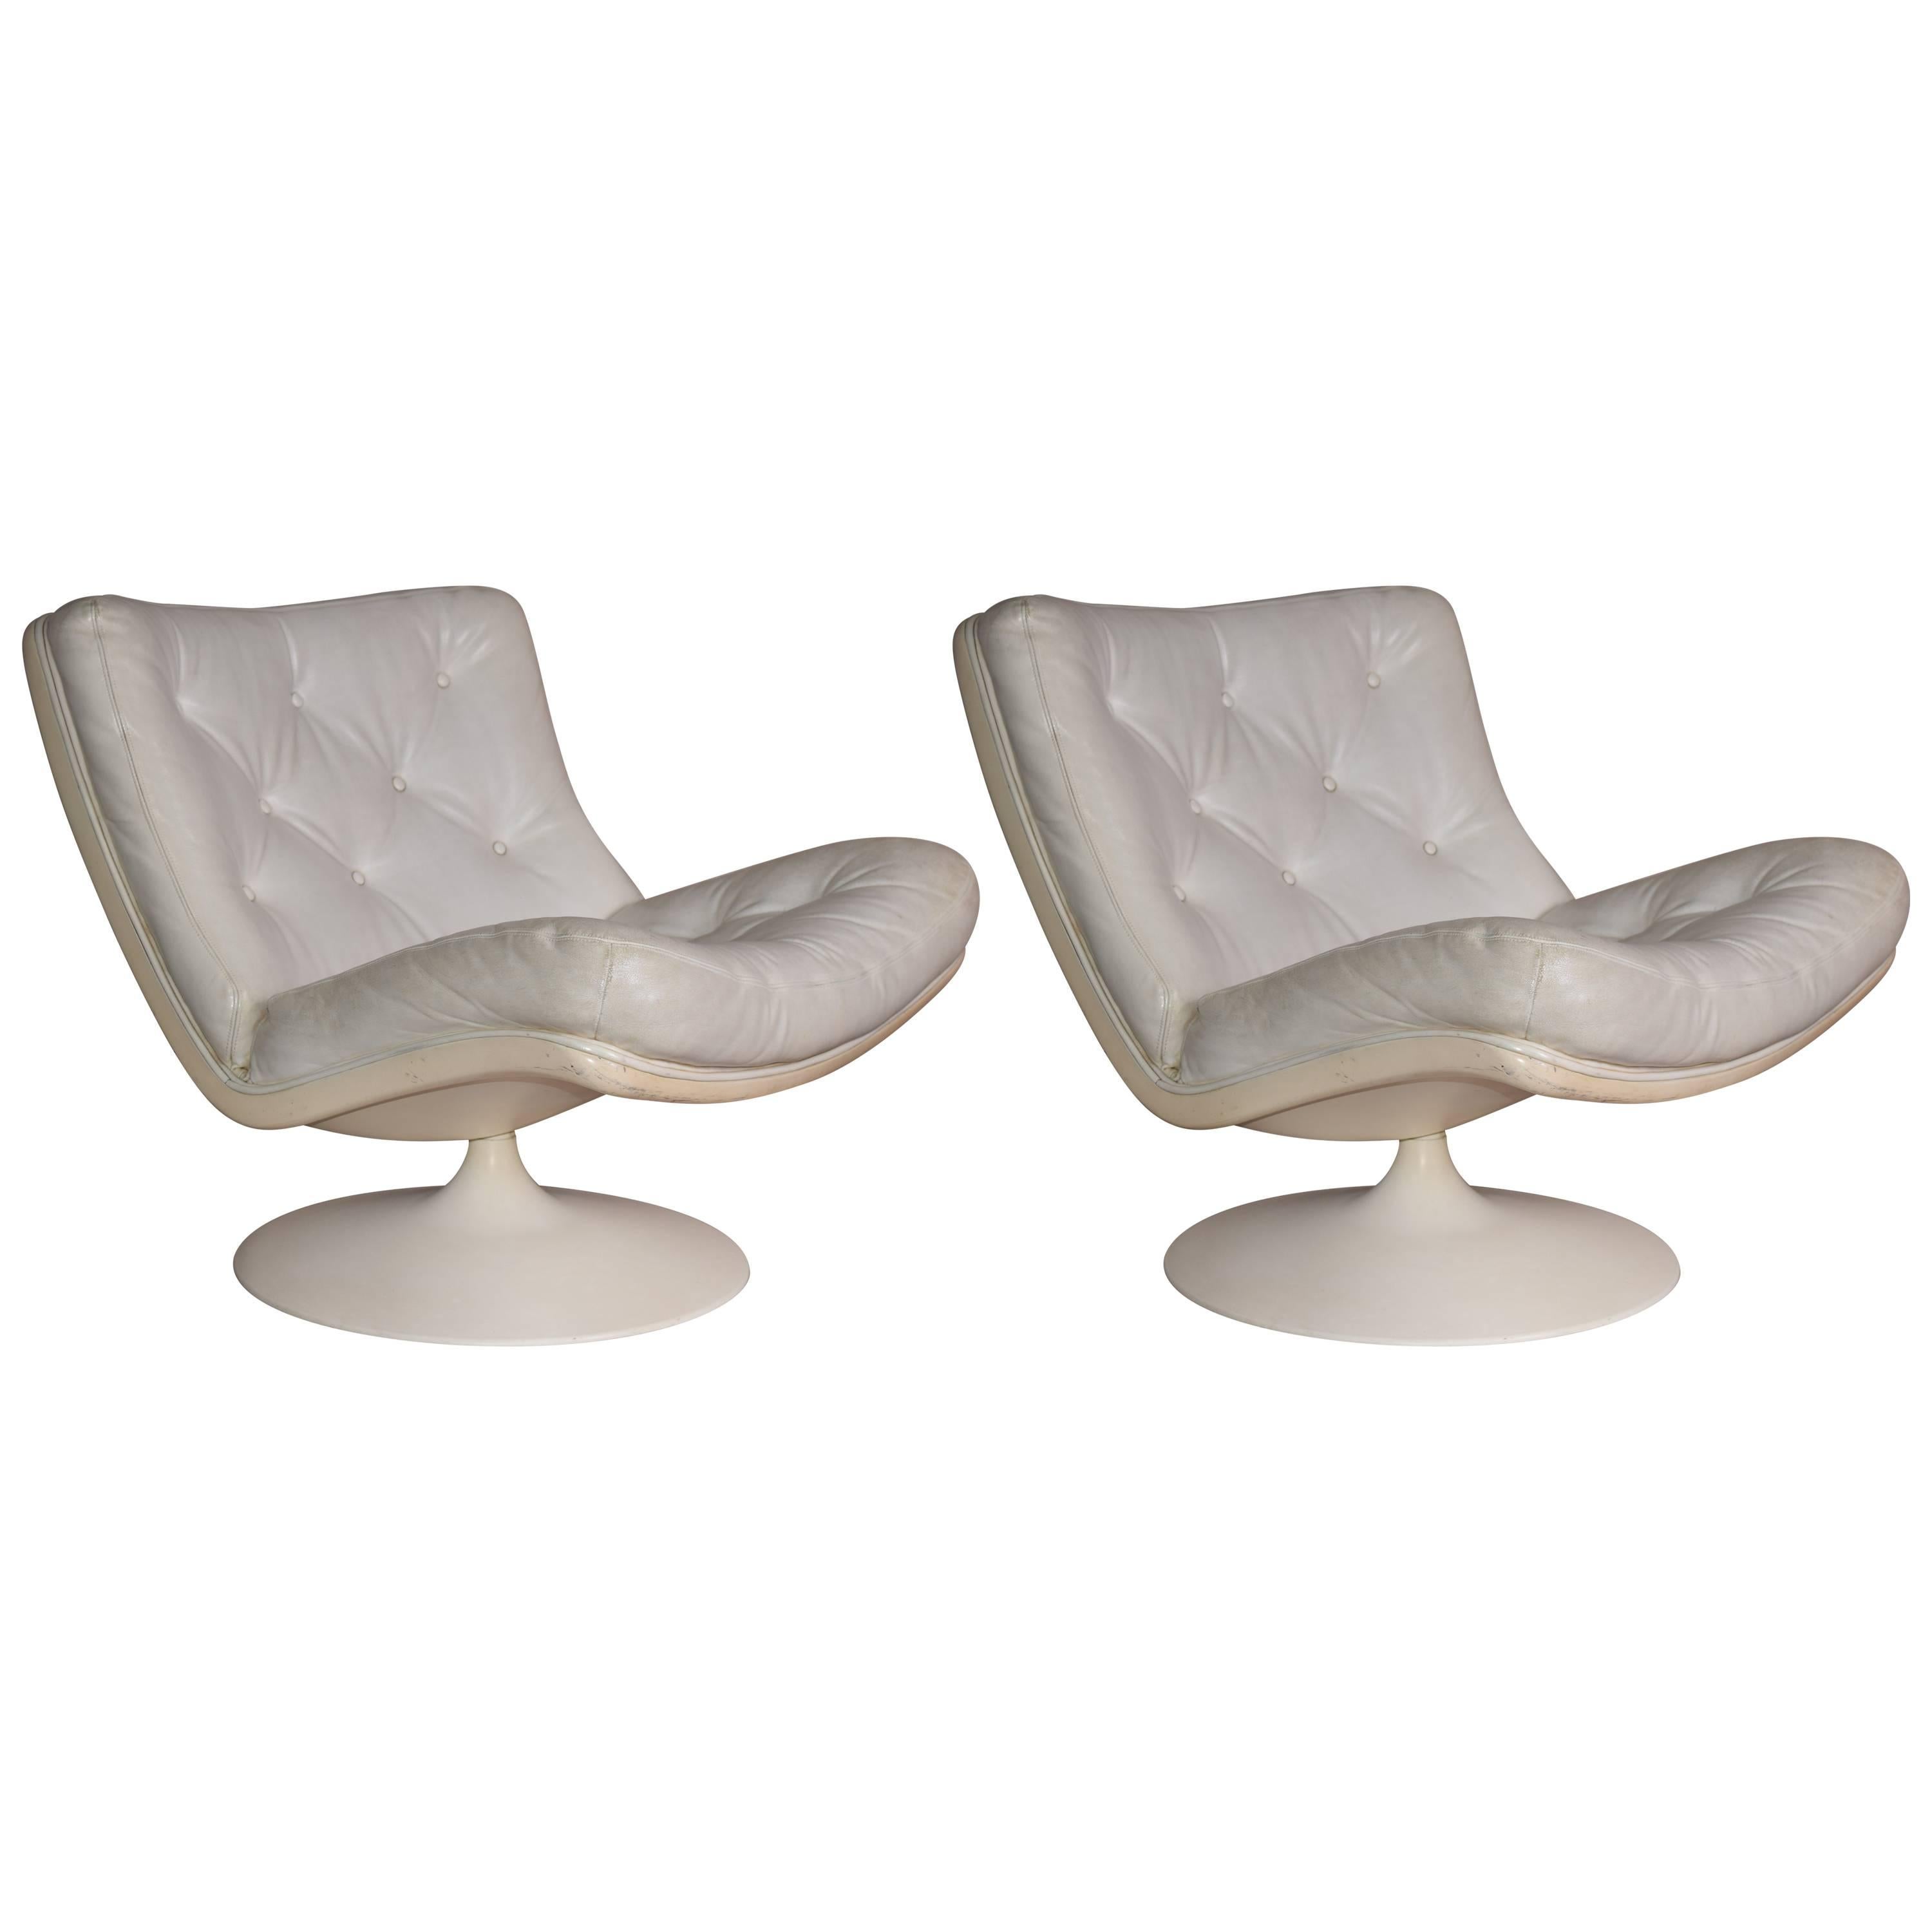 Signed Artifort Swivel Chairs by Geoffrey Harcourt